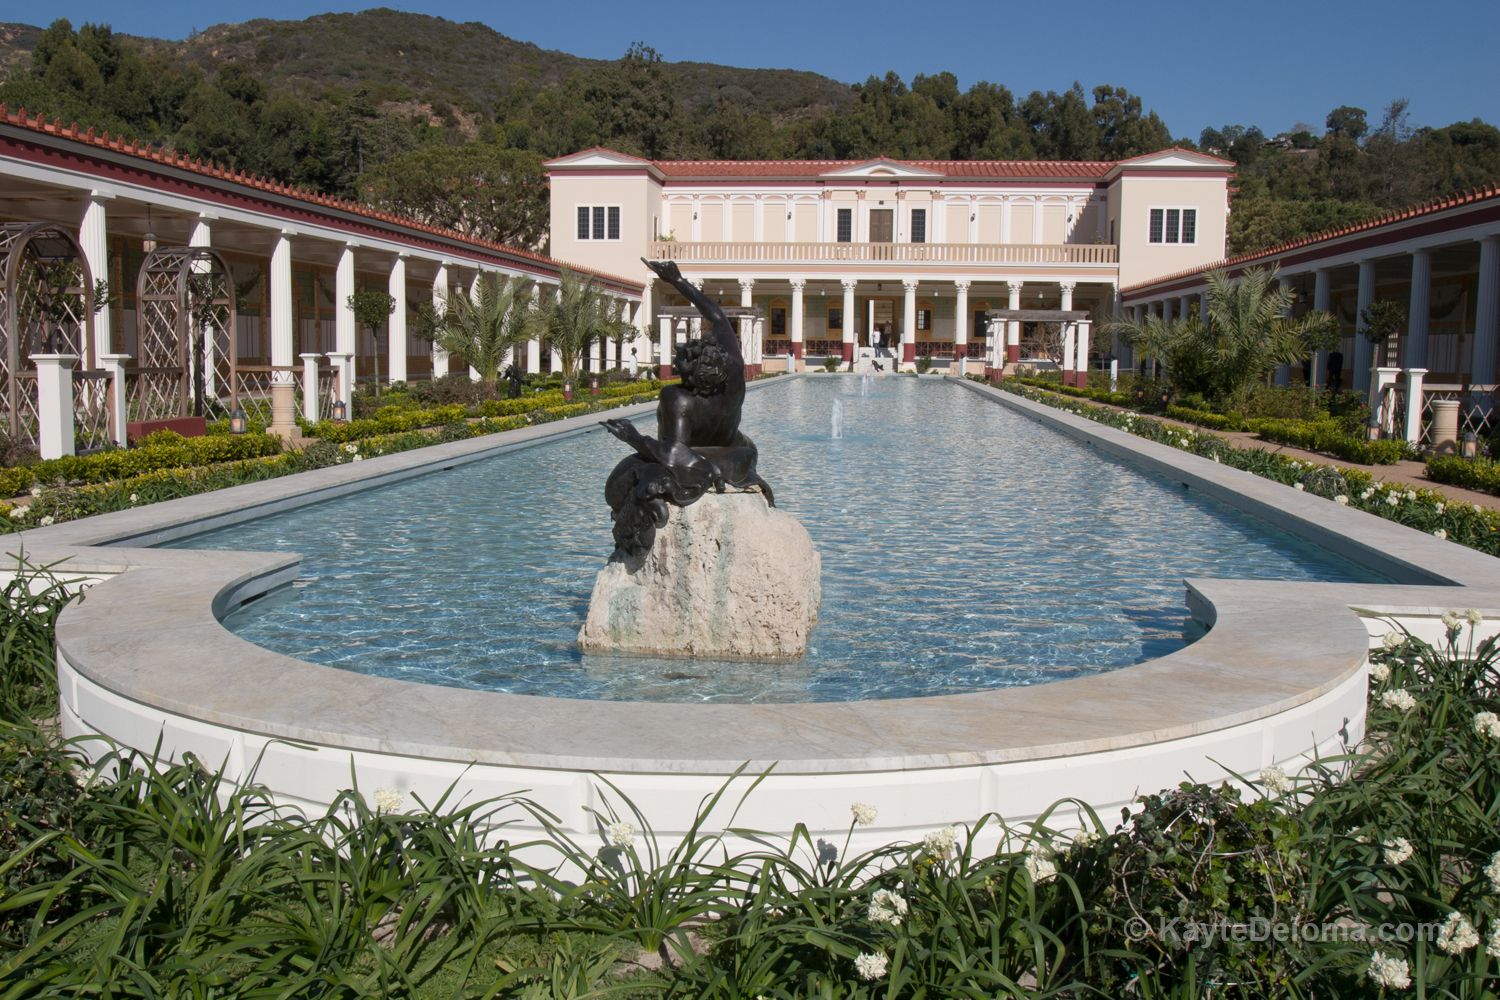 How to See the Getty Museum: Its More Than Just Exhibits